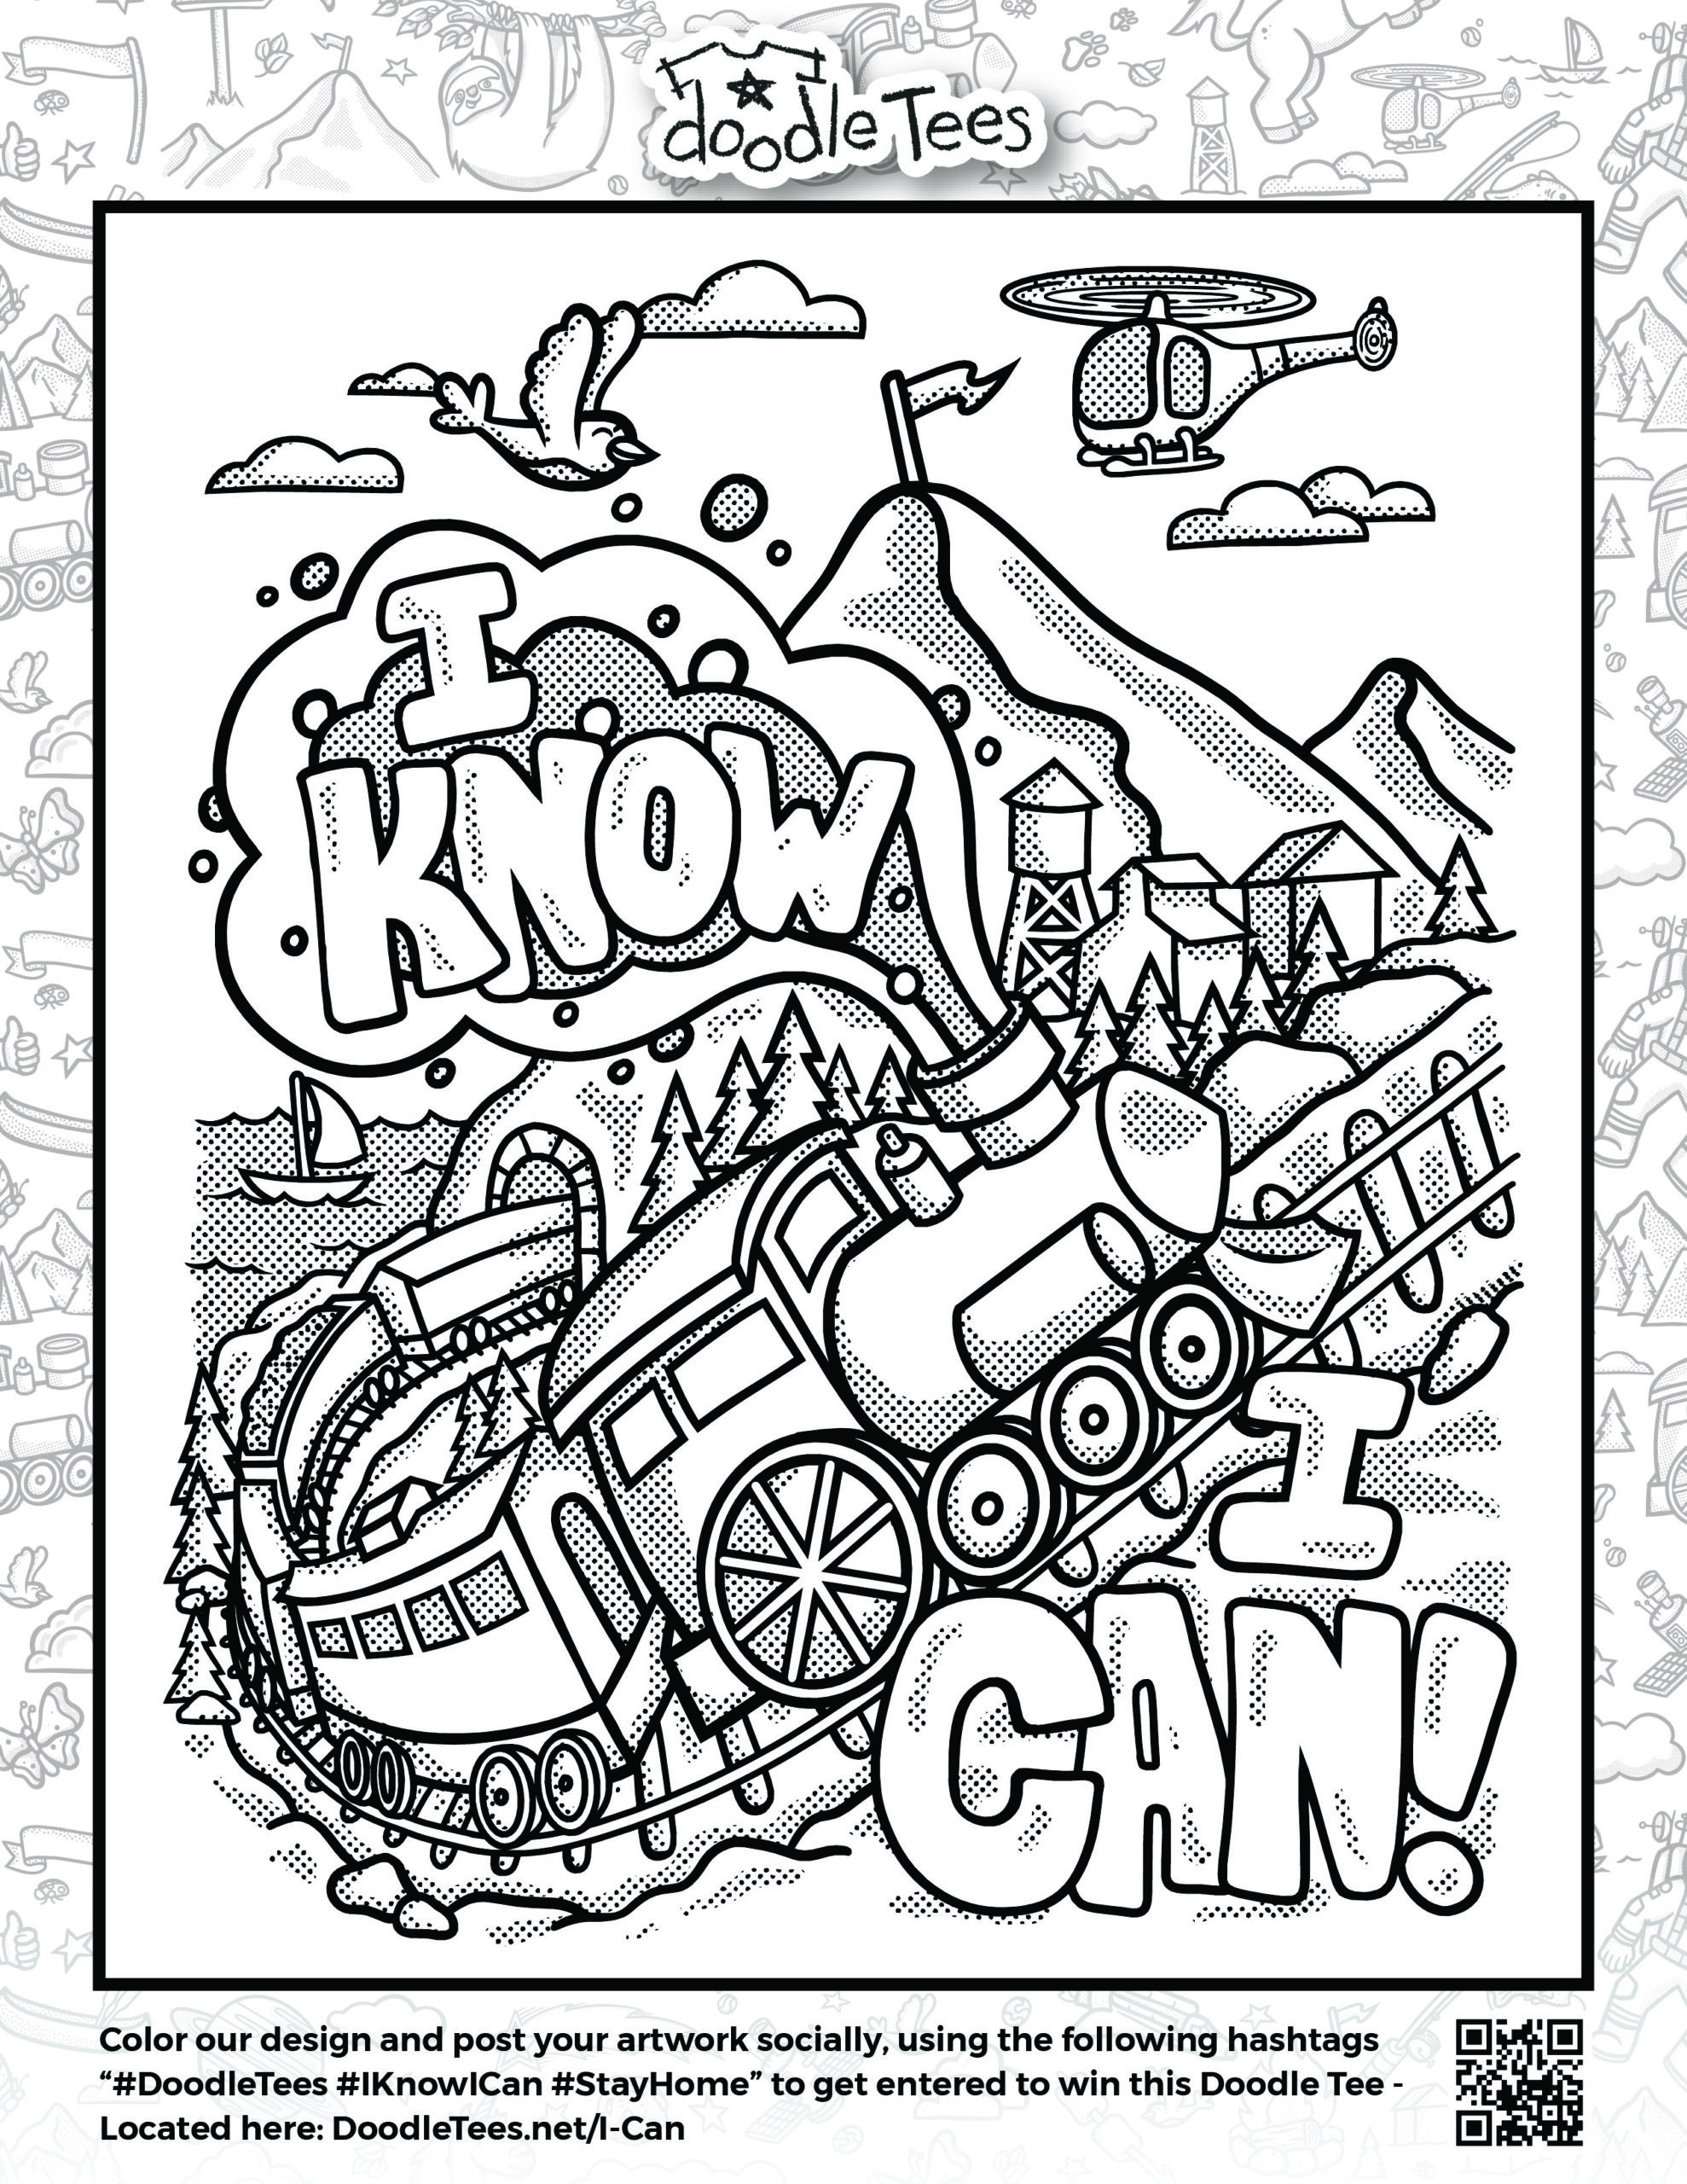 "Doodle Tees 'I Know I Can' train, mountains and helicopter design to download and print at home"